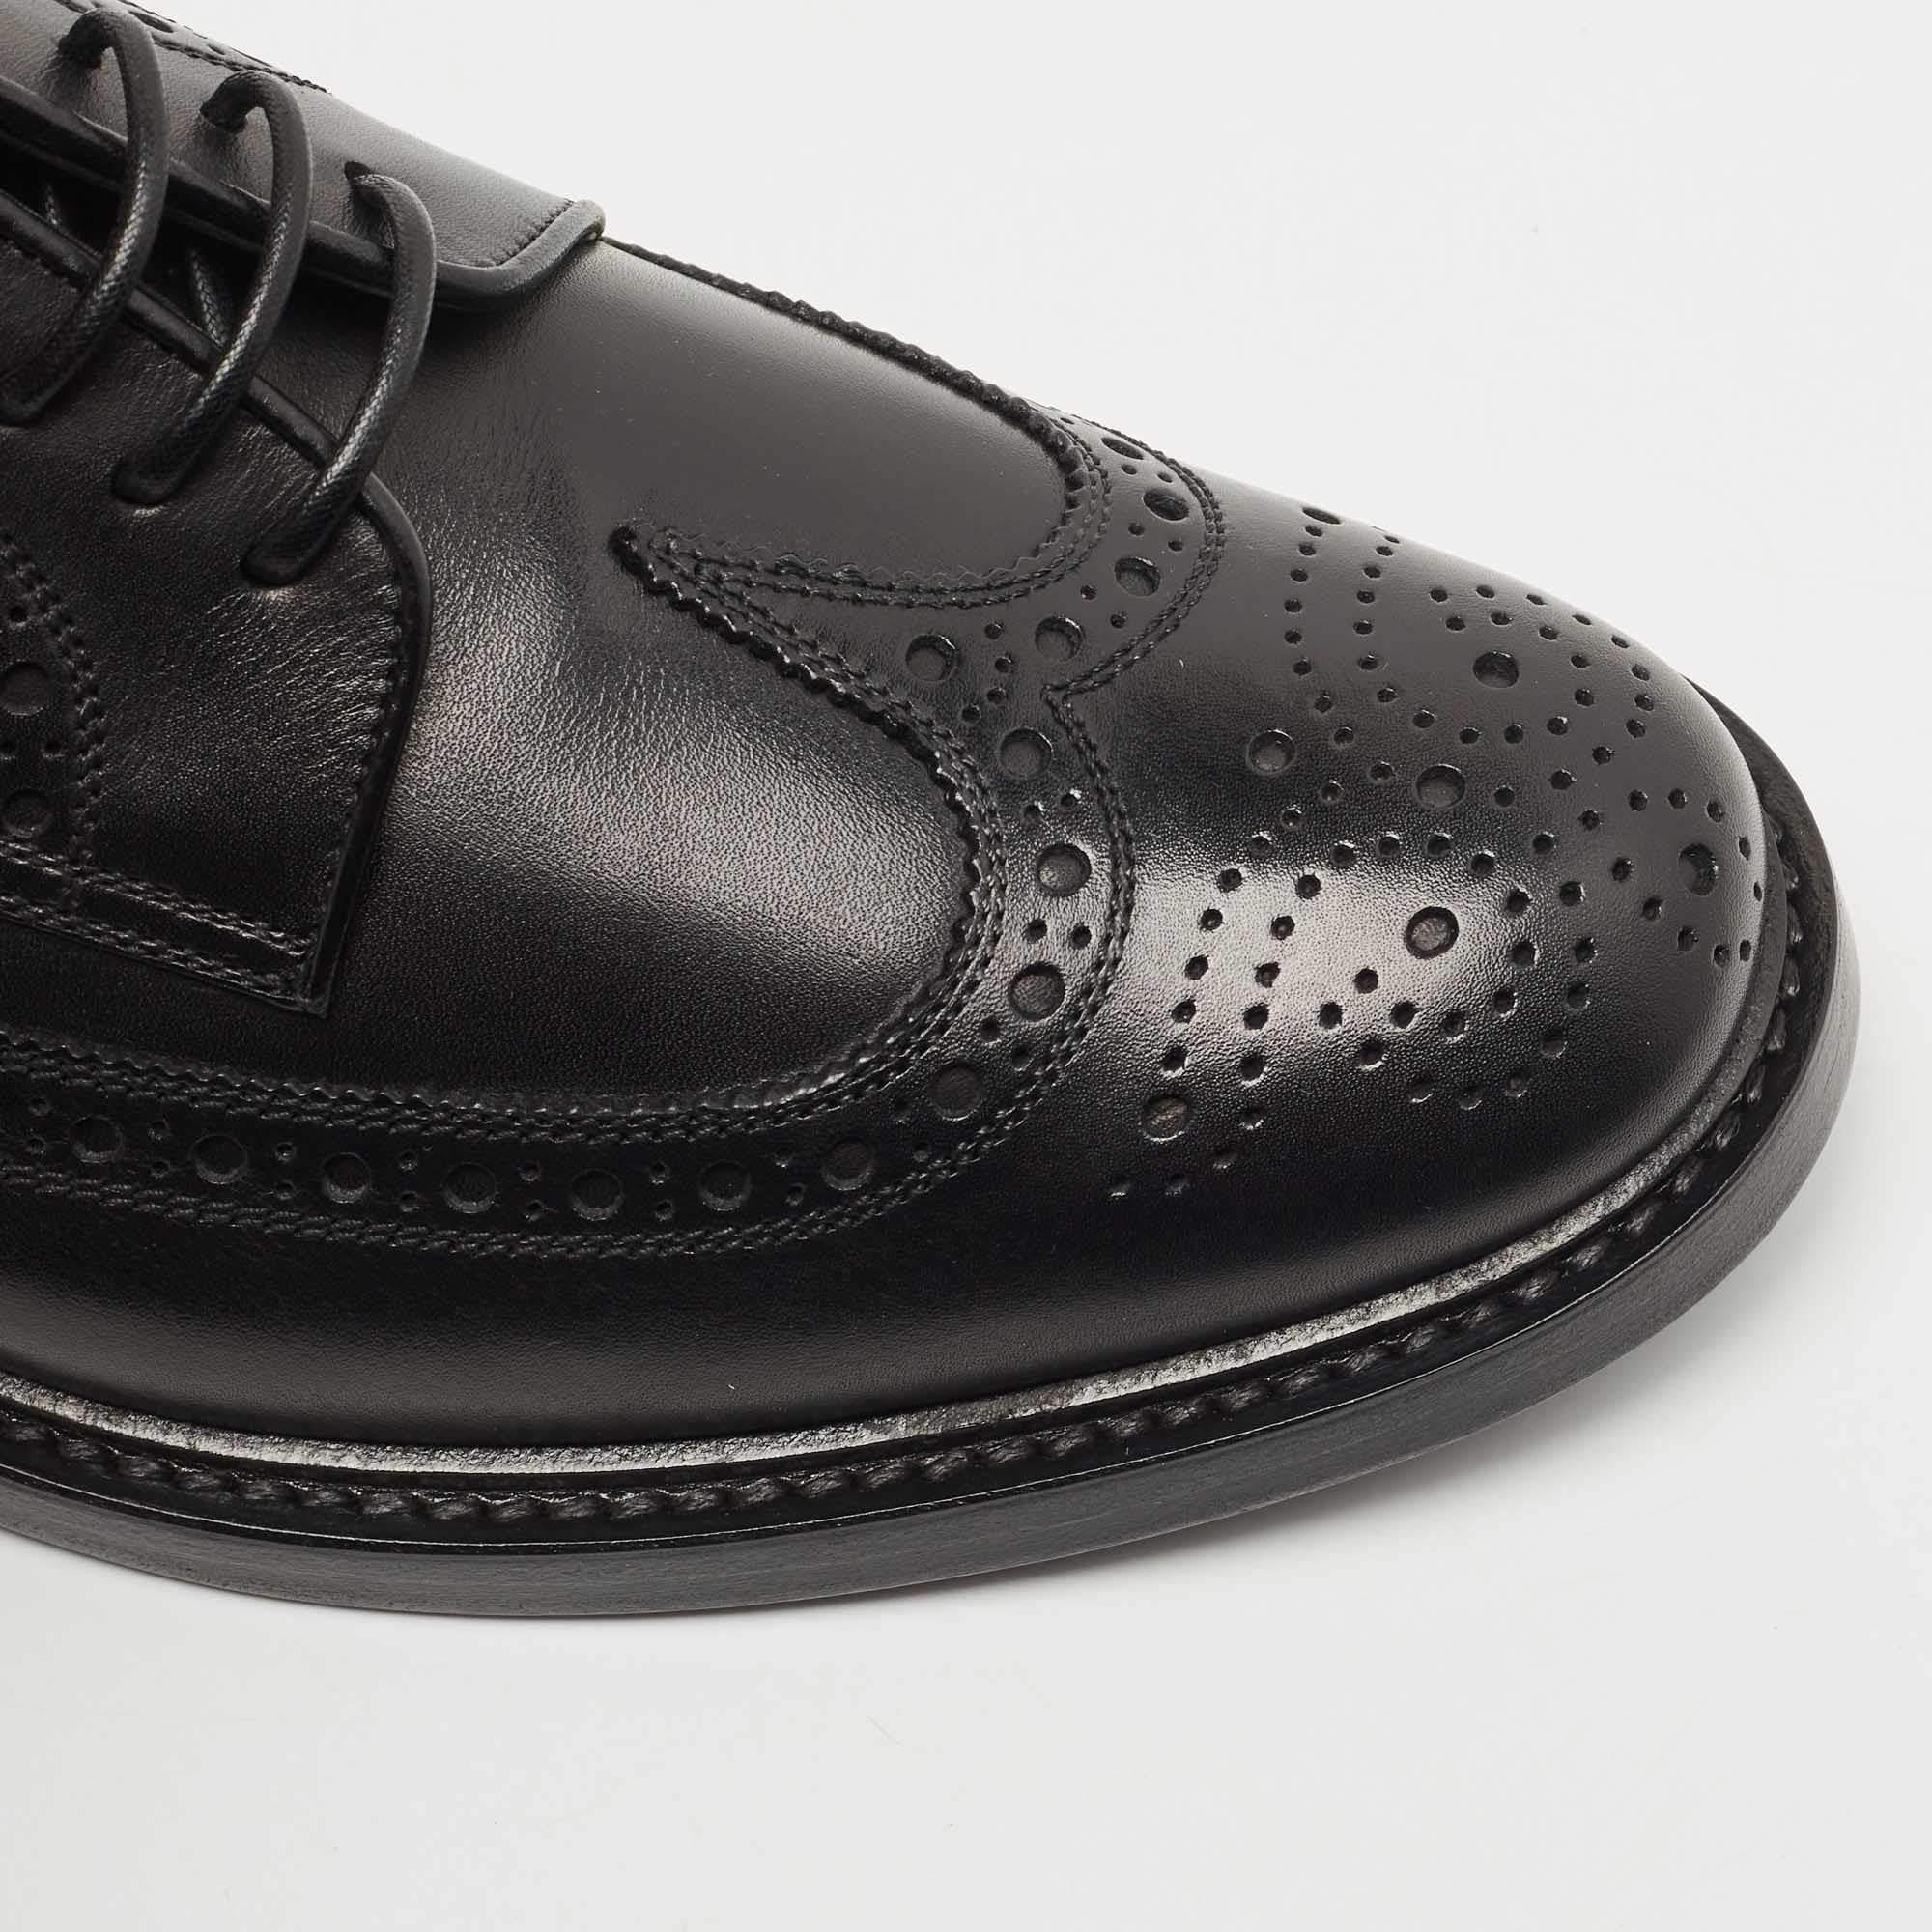 Burberry Black Brogue Leather Lace Up Derby Size 43 2